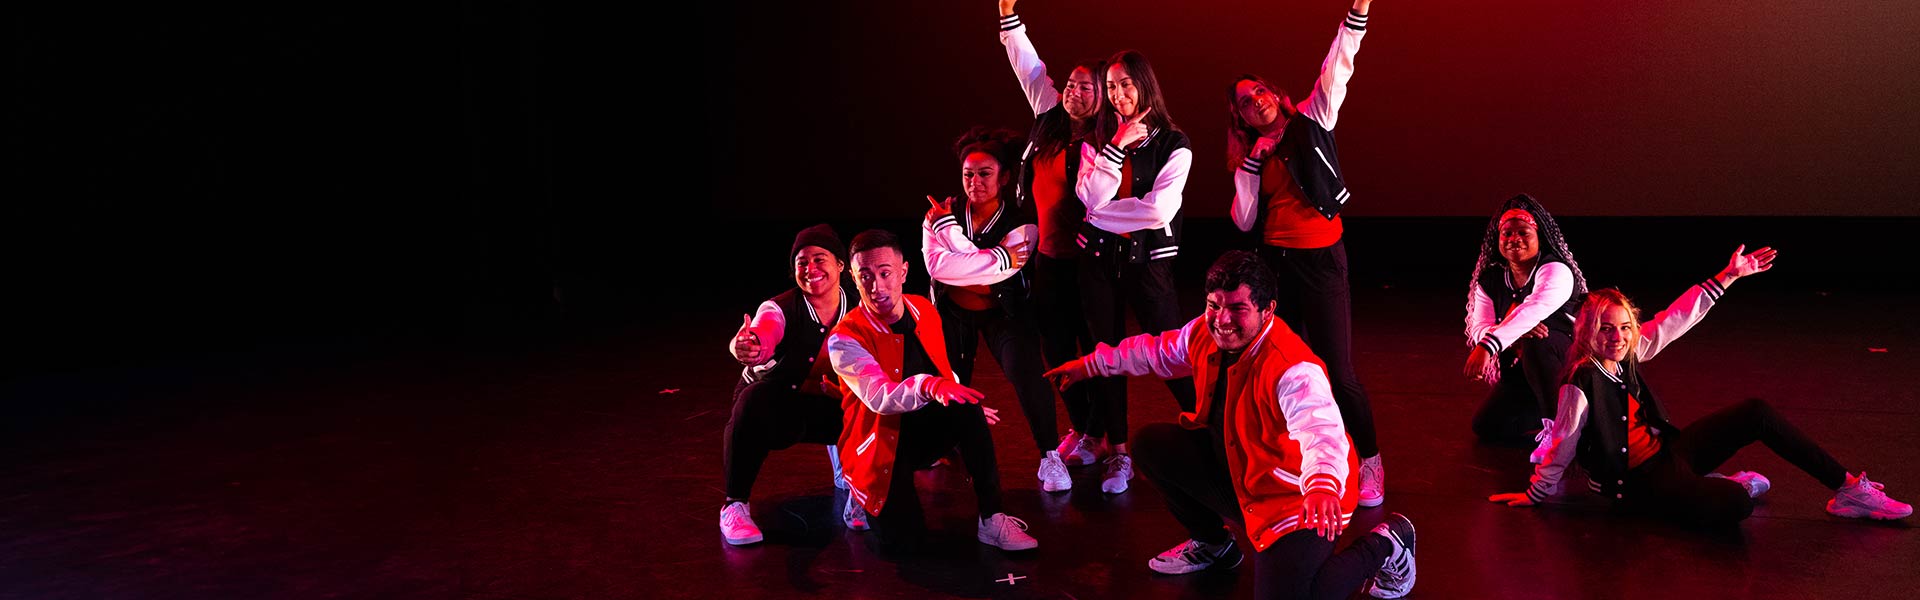 A group of dance students pose together on stage